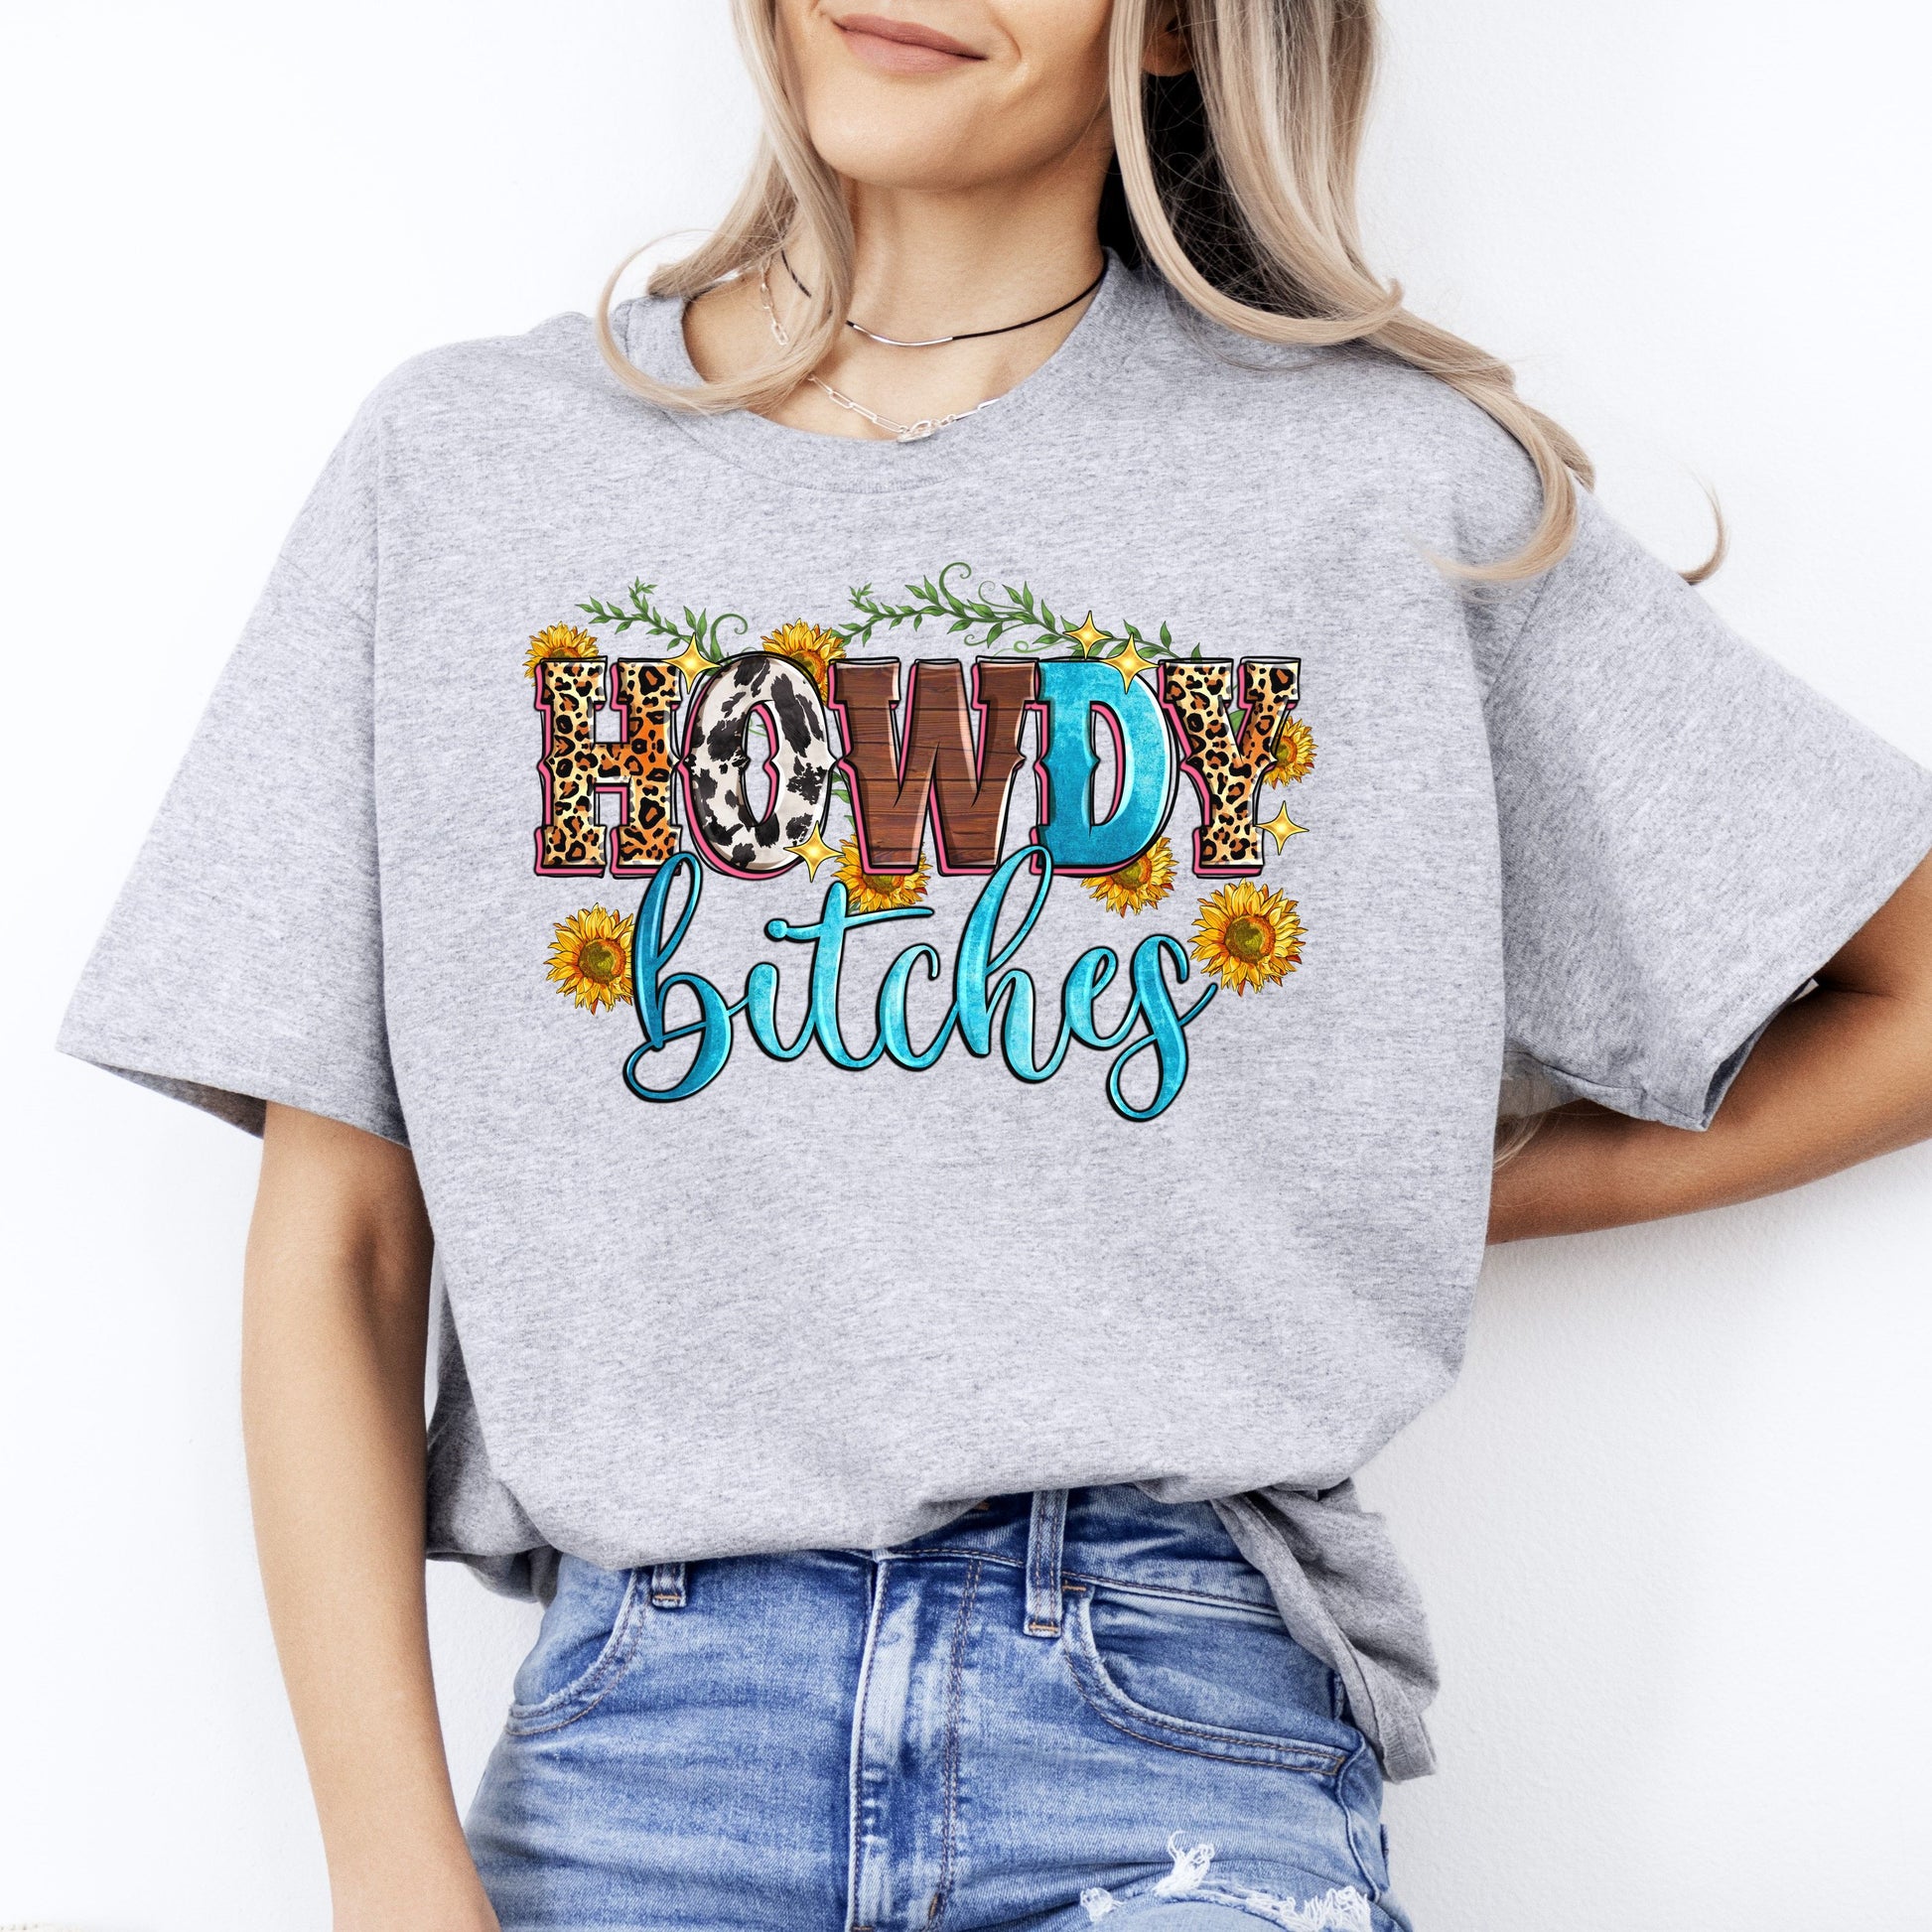 Howdy bitches T-Shirt gift Western Texas girl Unisex tee Sand White Sport Grey-Sport Grey-Family-Gift-Planet